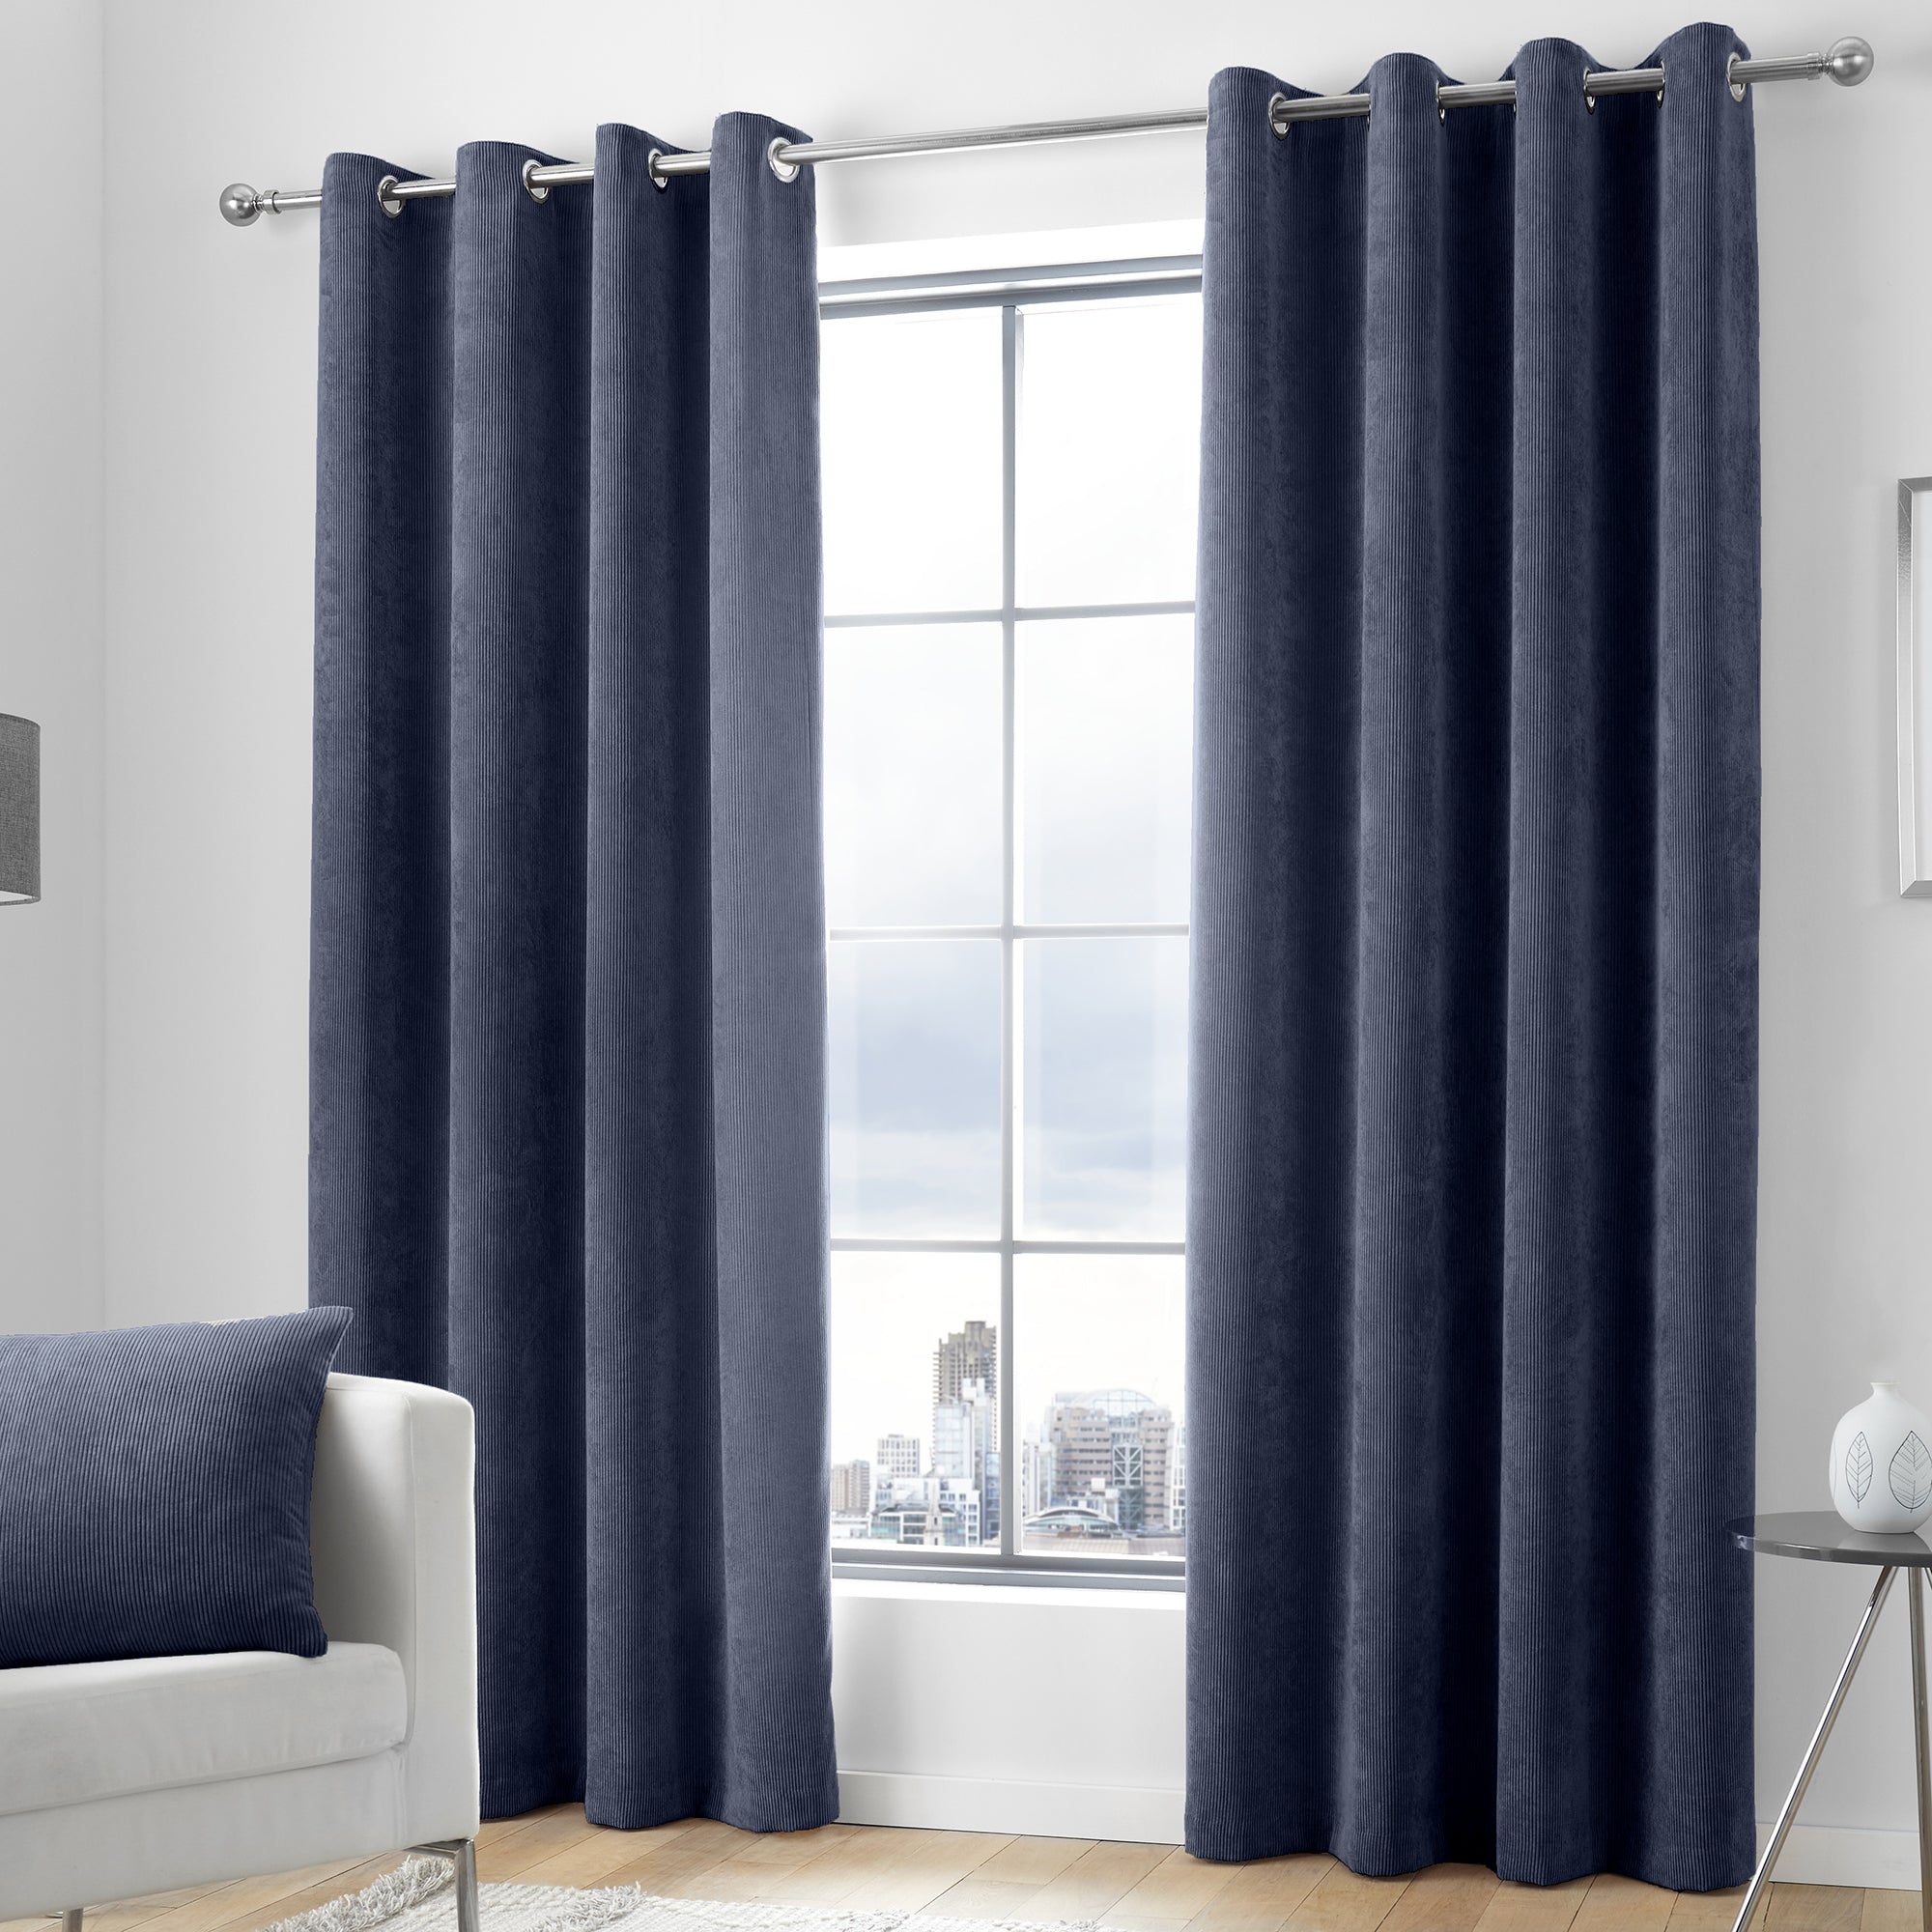 Kilbride Cord - Chenille Eyelet Curtains in Navy - By Appletree Loft